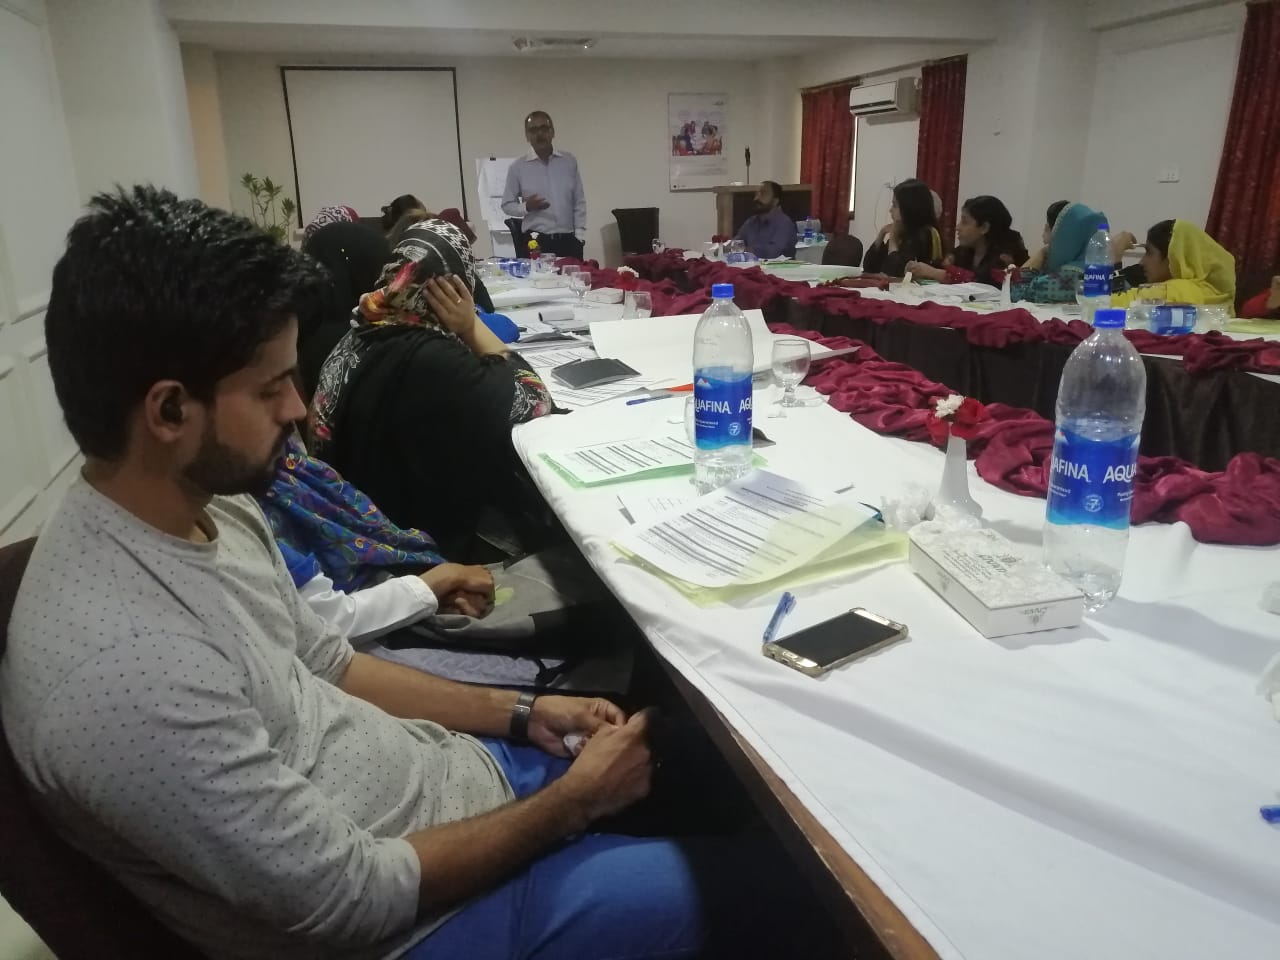 Three day training programme organized by the Democratic Commission of Human Development (DCHD) in Karachi.